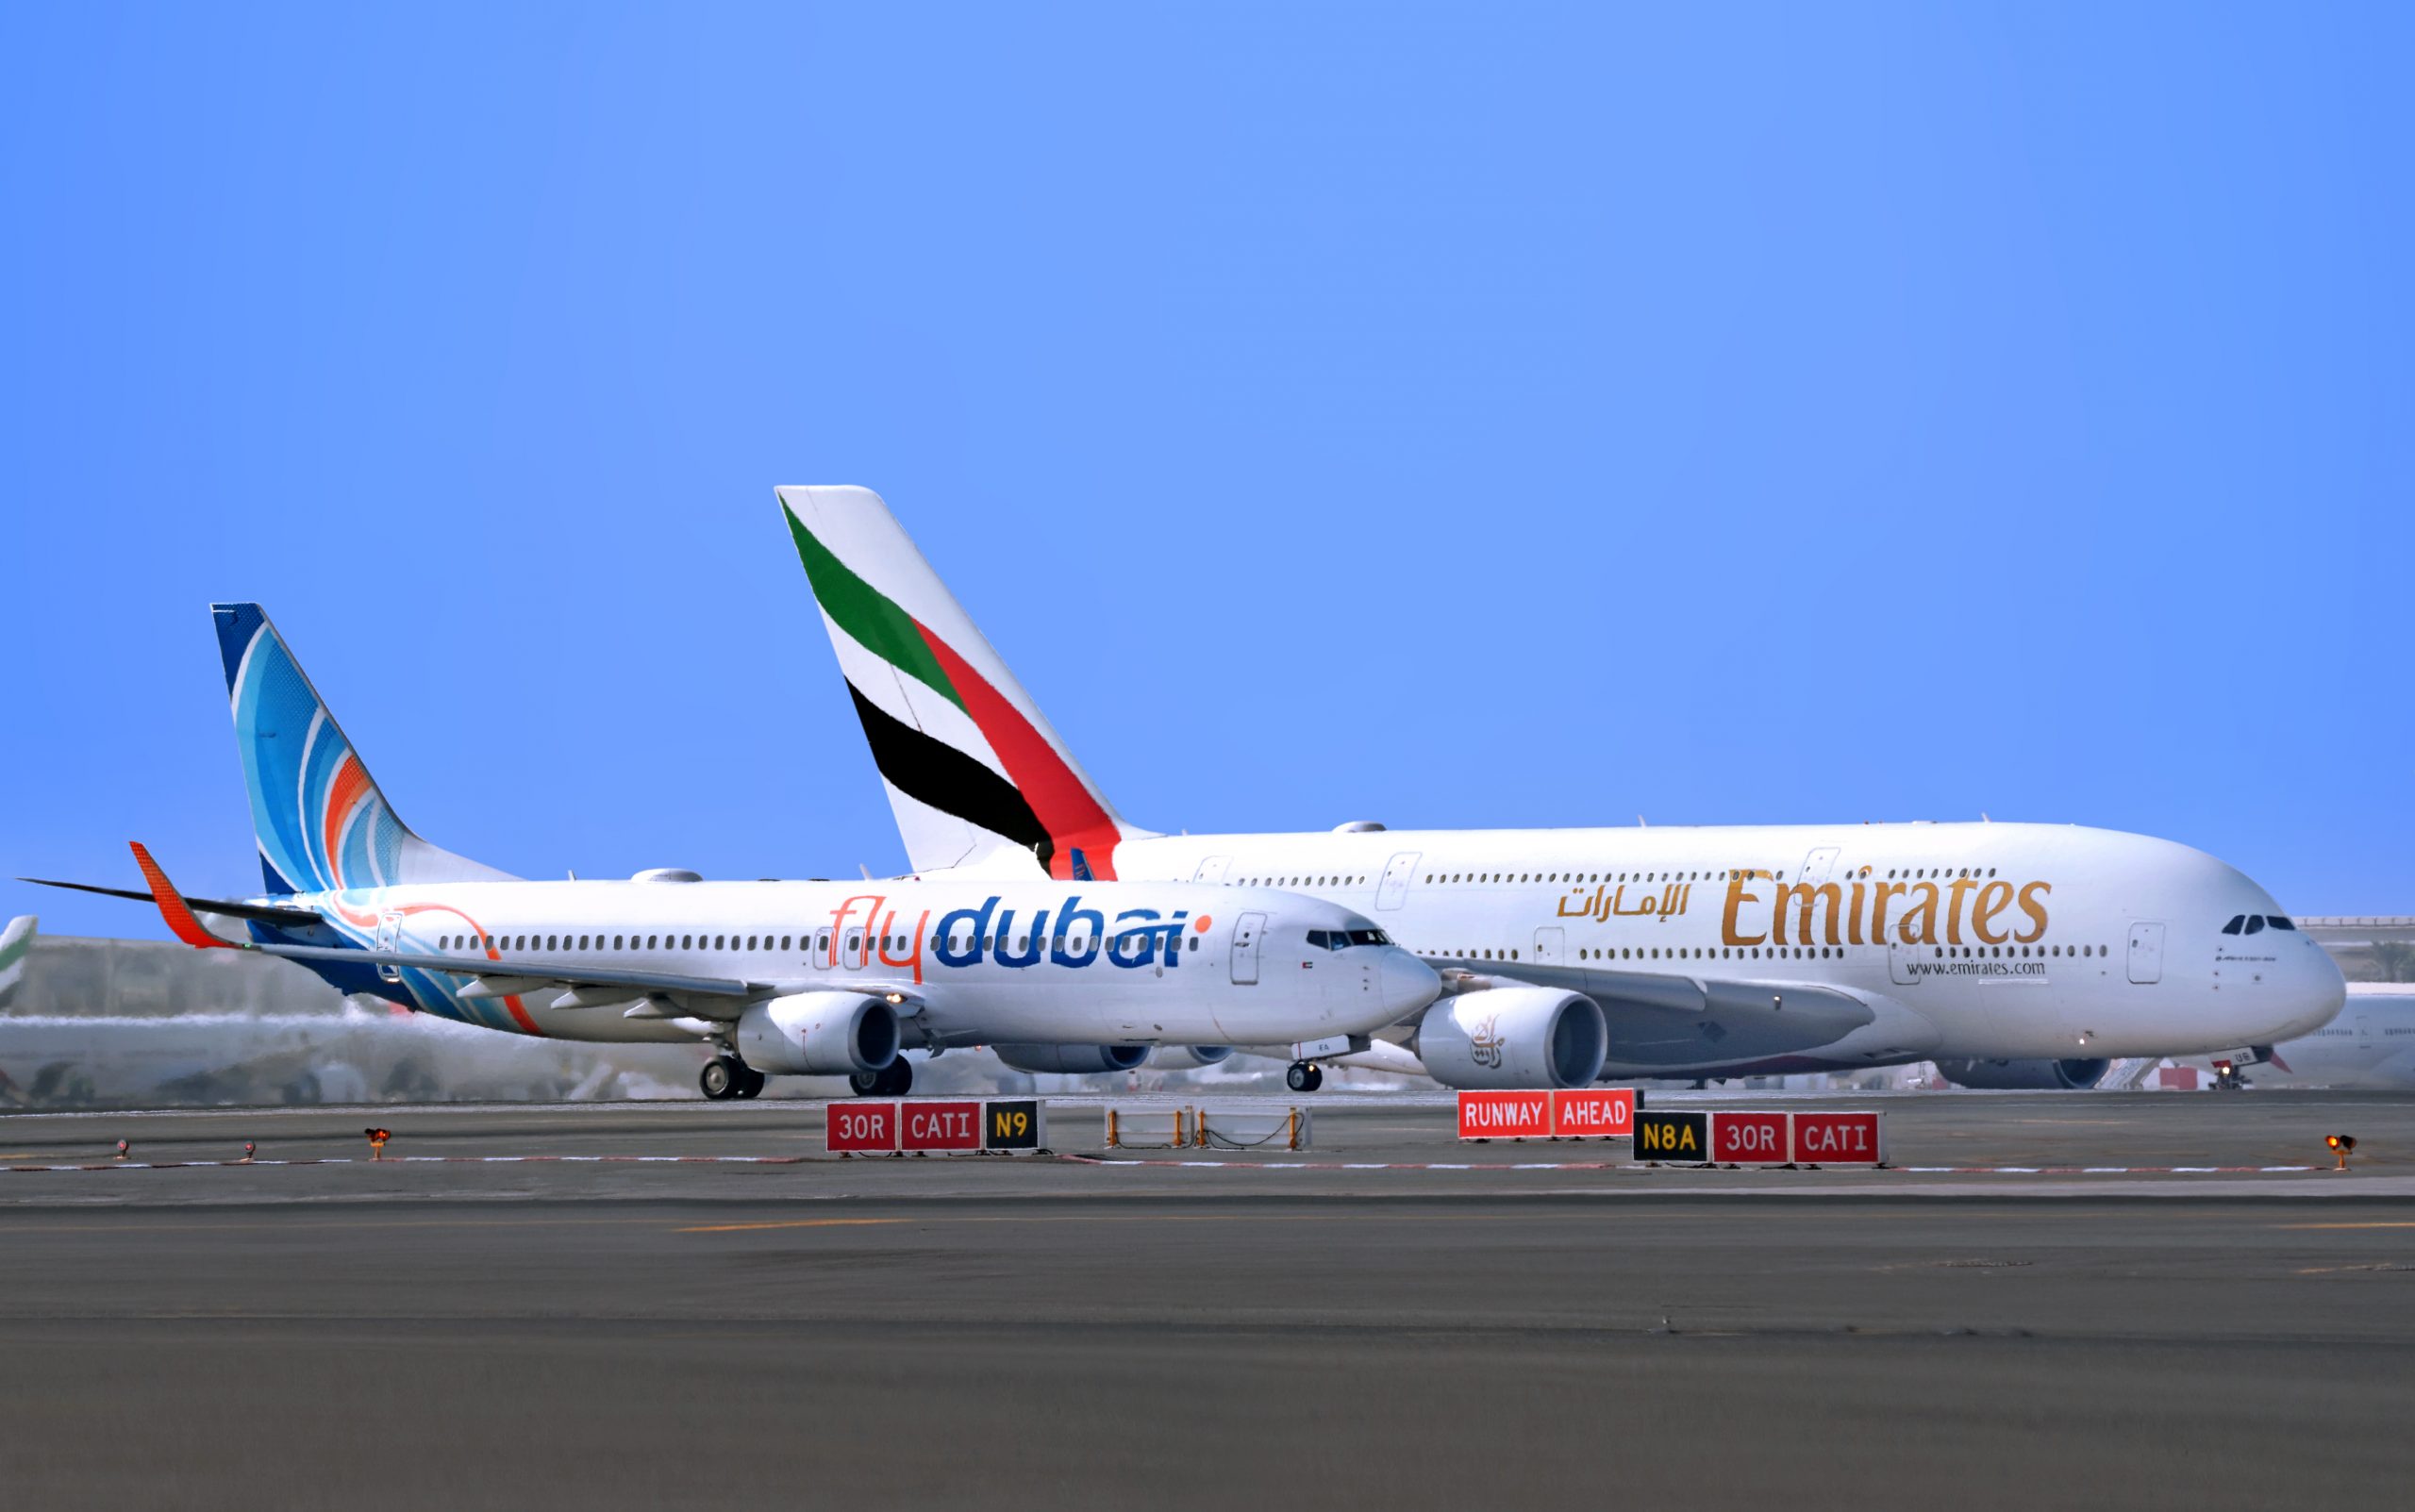 Earlier this year, Emirates and sister airline, flydubai announced a significant new partnership. Photo Credit: Emirates